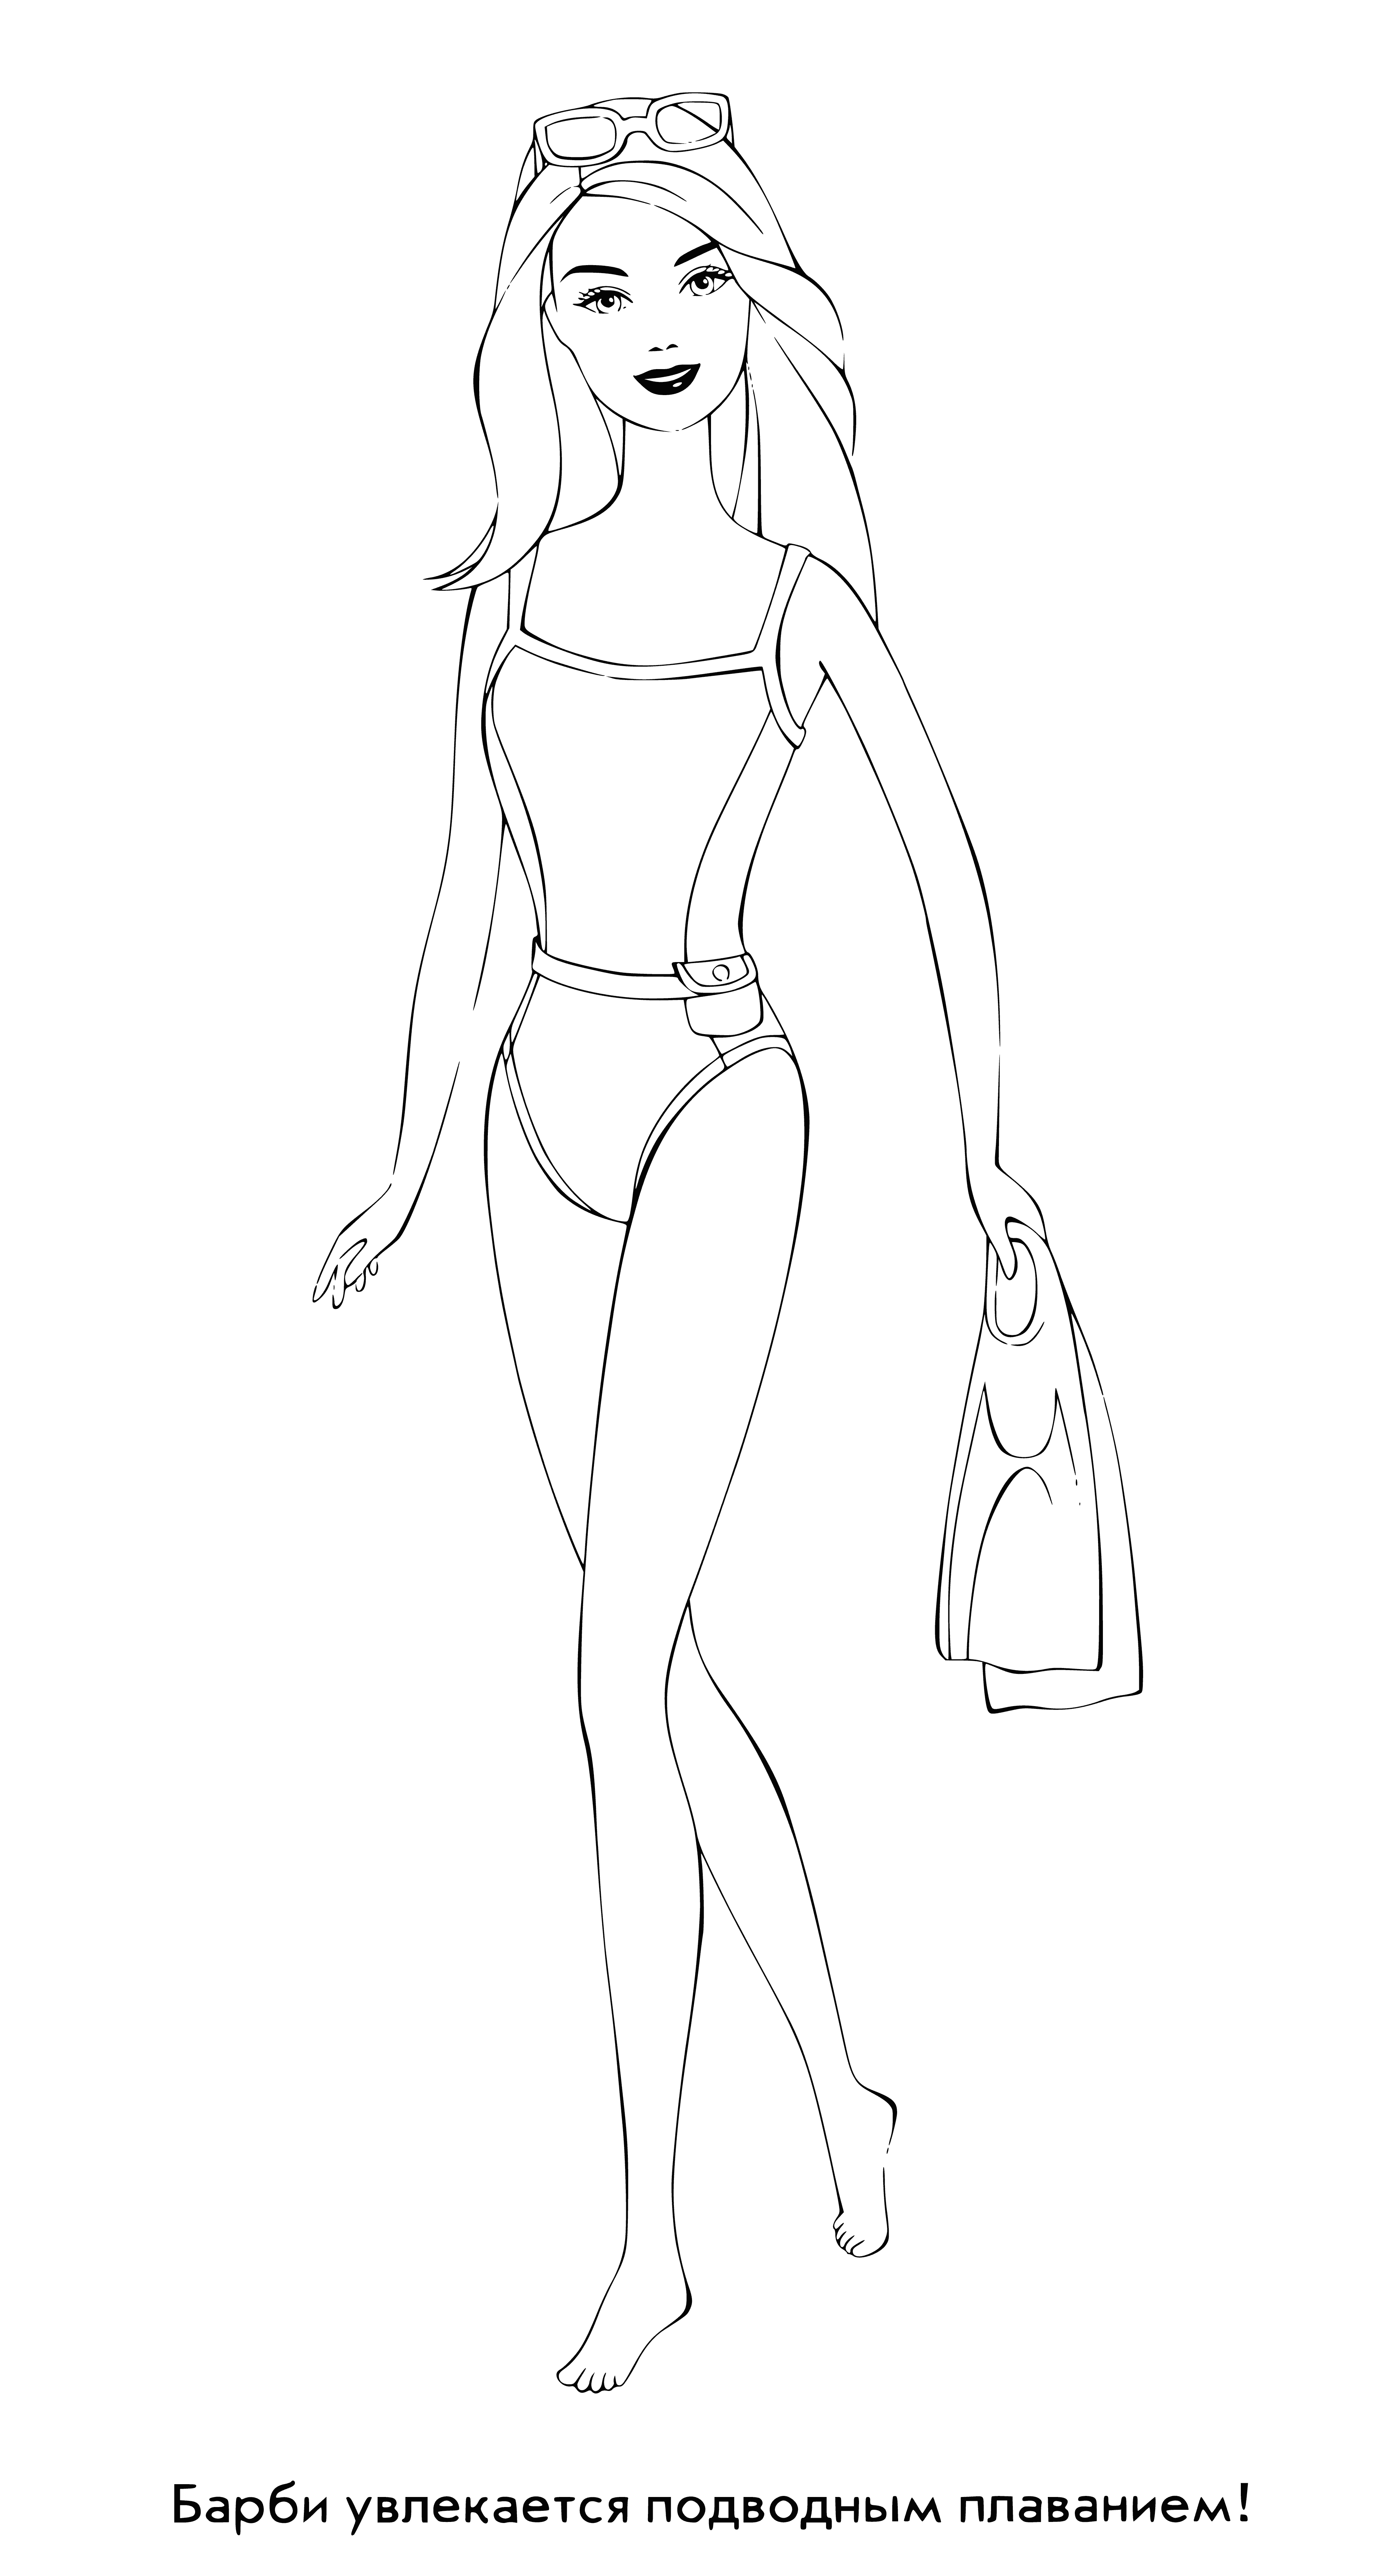 Swimsuit barbie coloring page